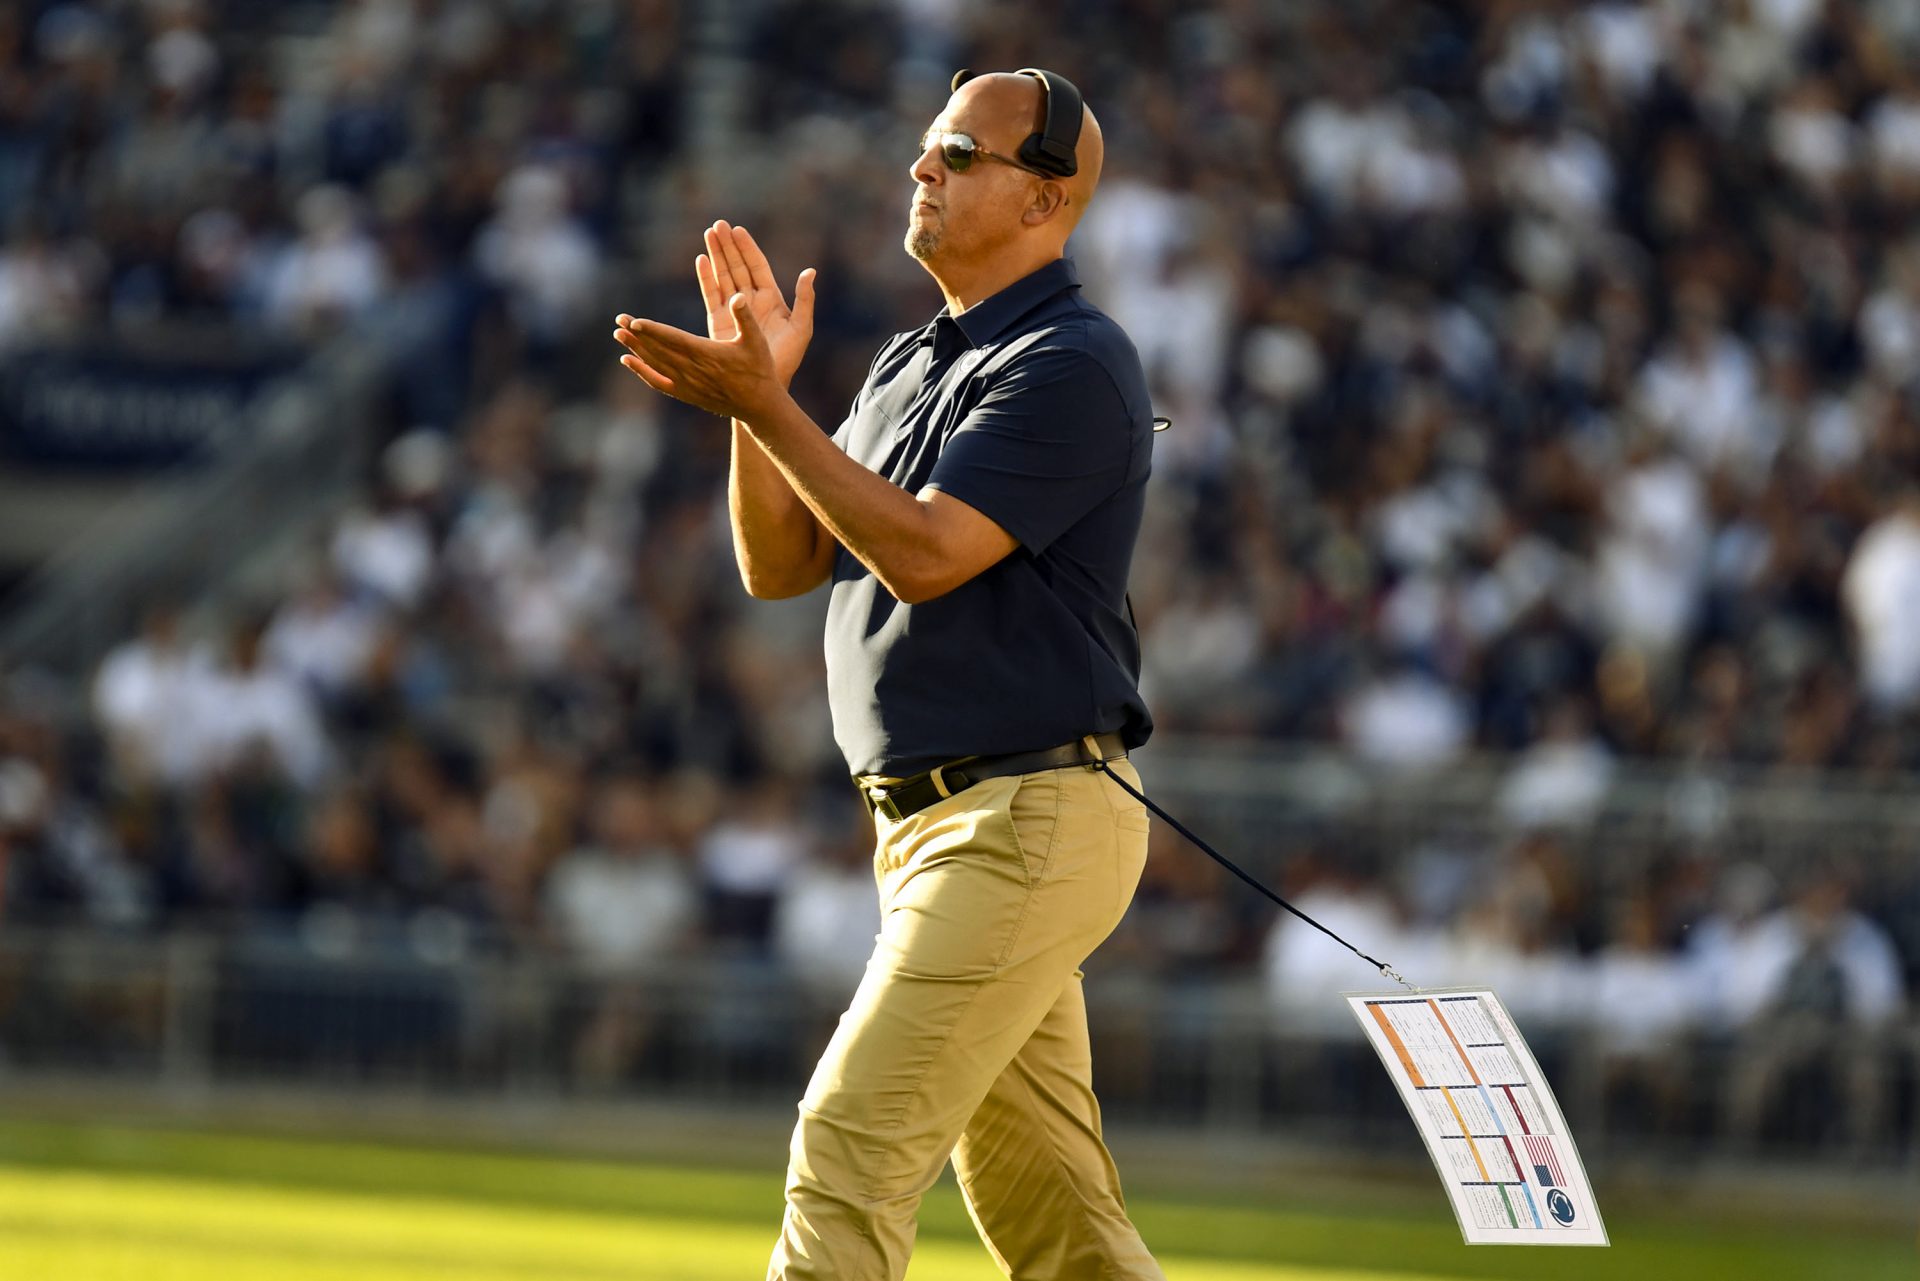 Penn State head coach James Franklin celebrates a score against Ball State during an NCAA college football game in State College, Pa., on Saturday, Sept. 11, 2021.